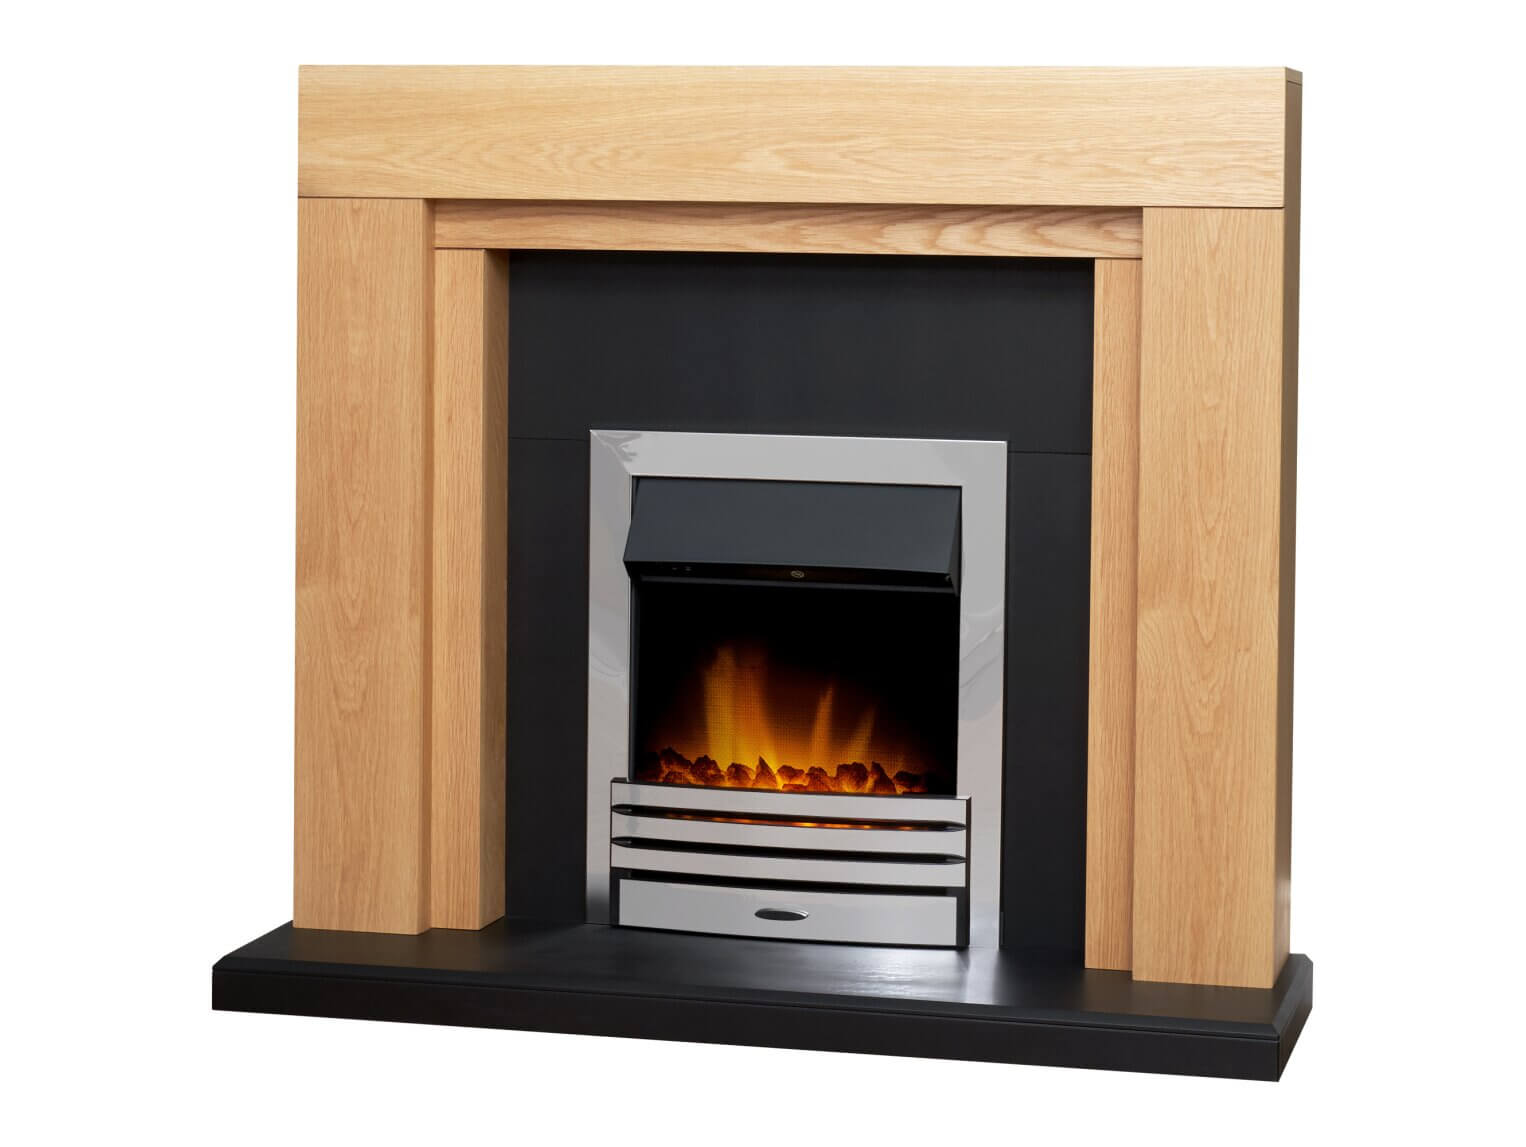 Adam Beaumont Oak & Black Fireplace with Downlights & Eclipse Electric Fire in Chrome - Glowing Flames